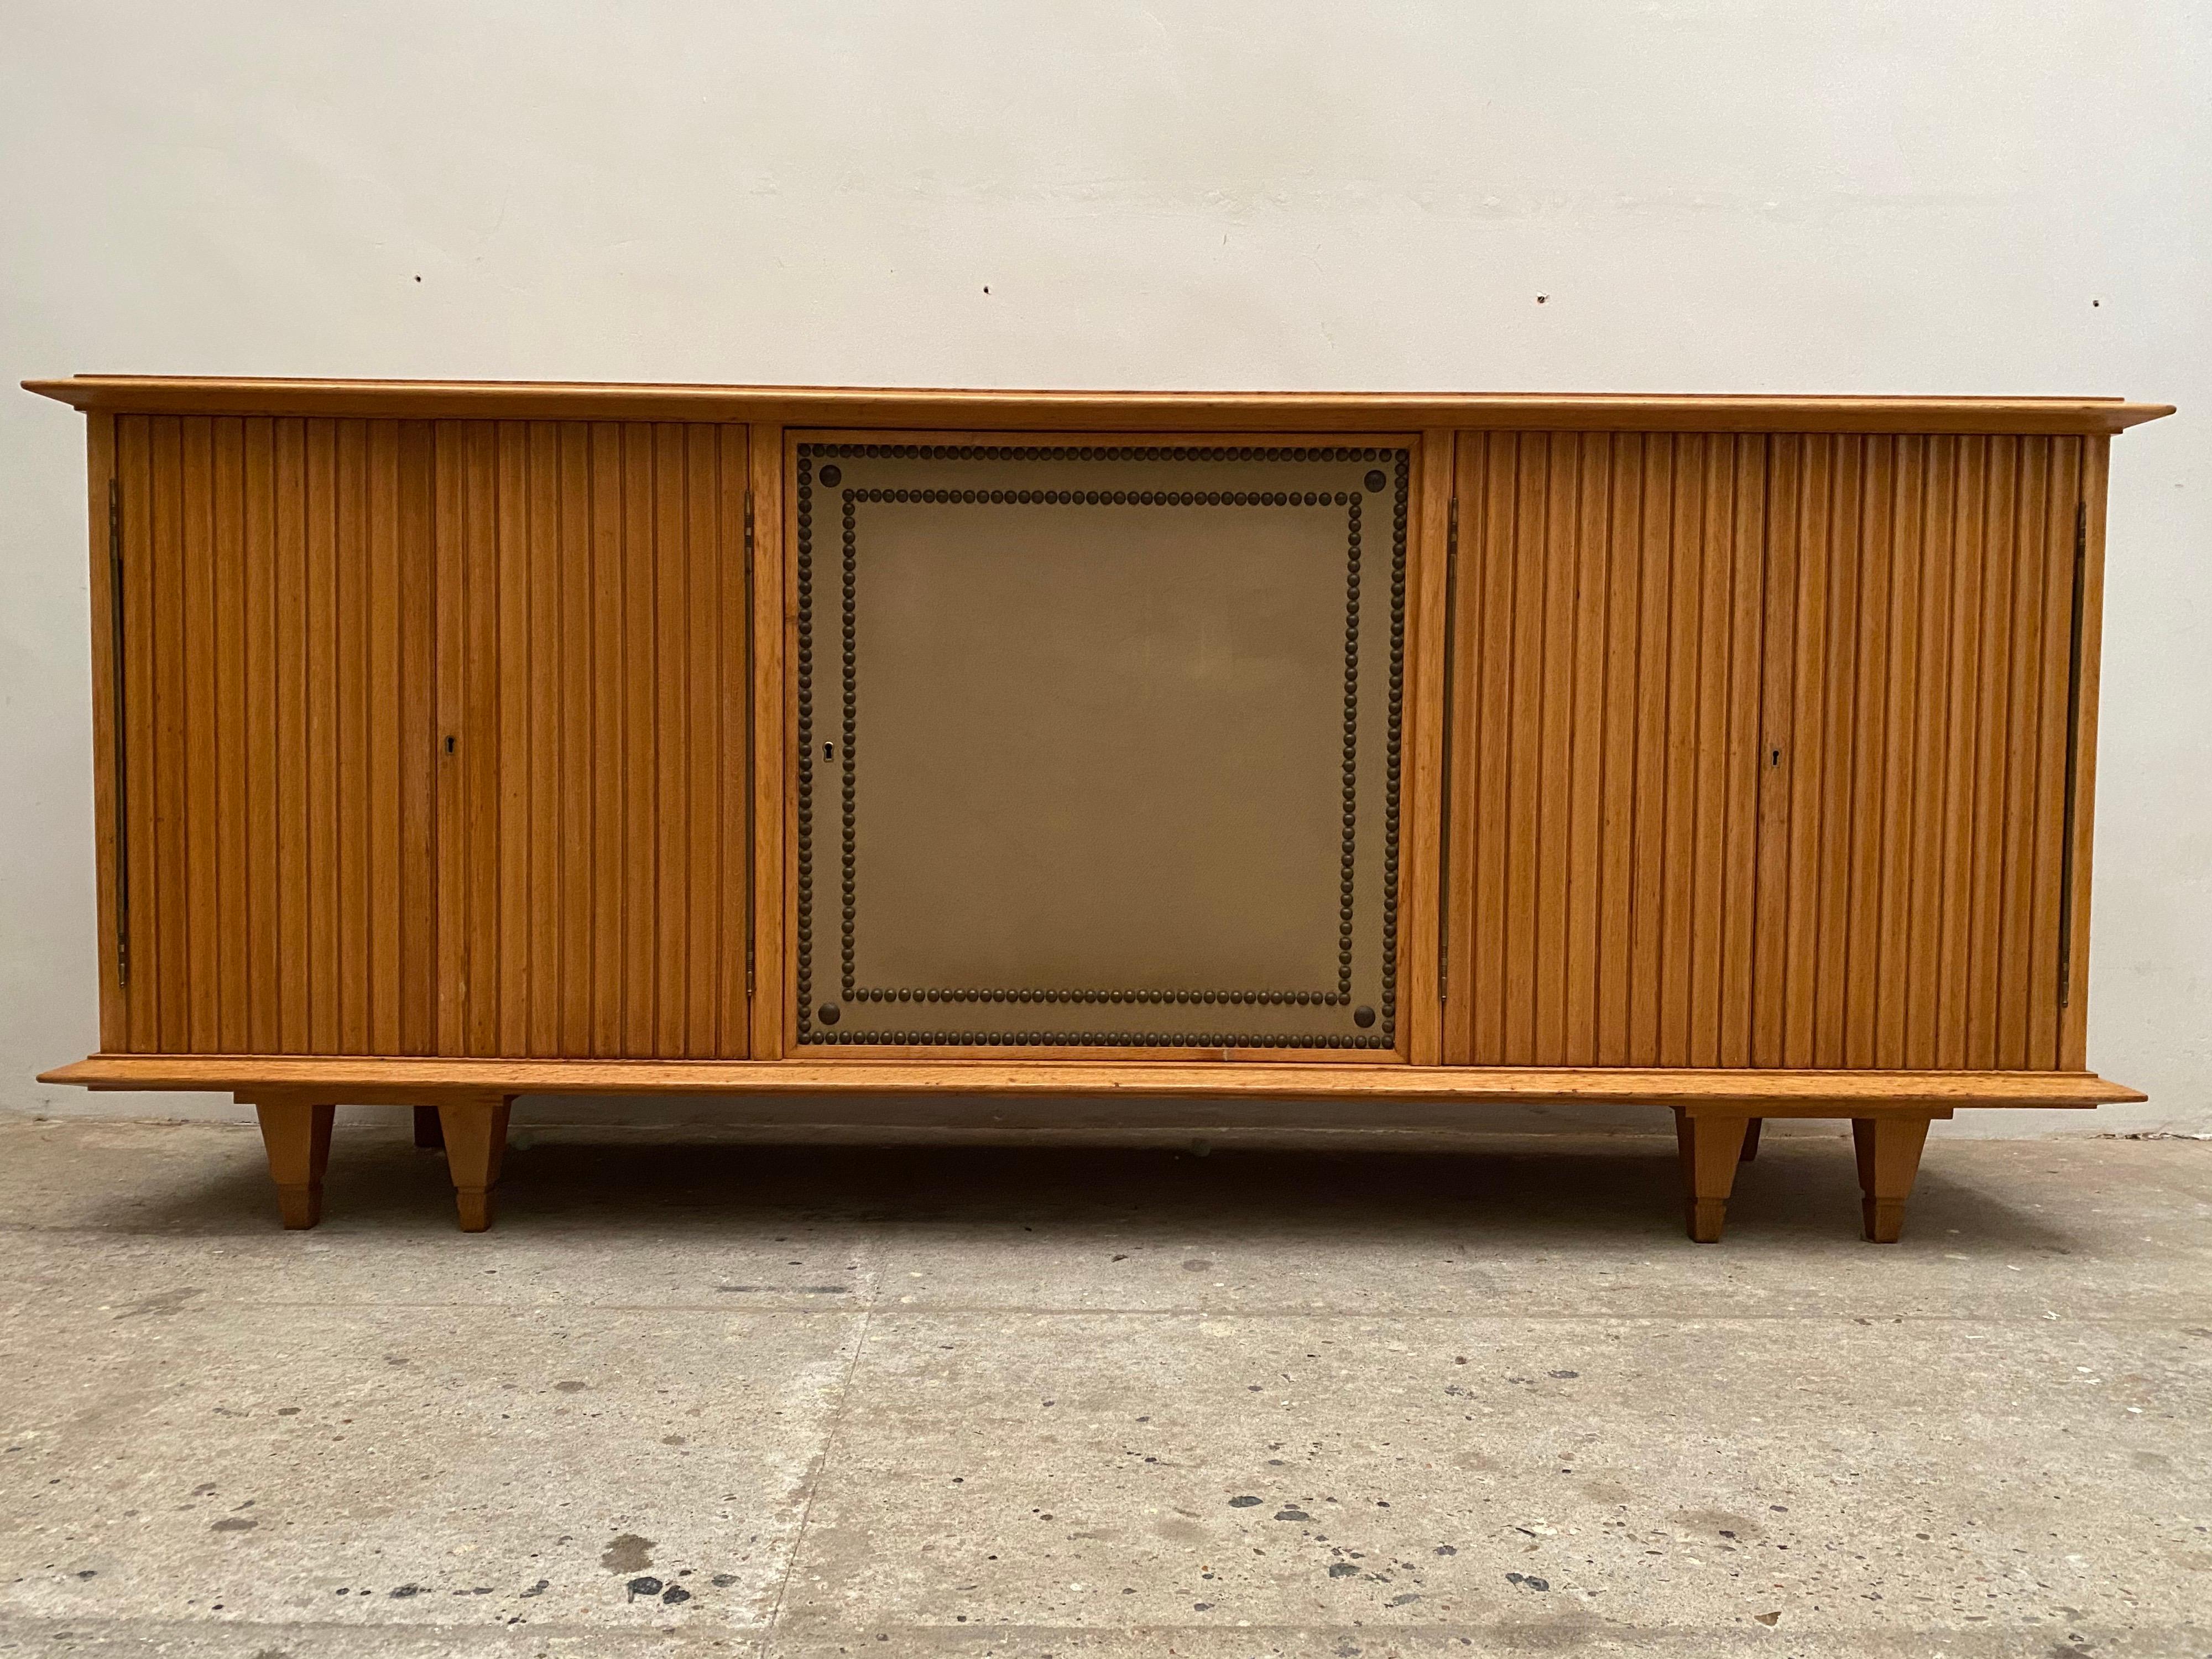 Exceptional piece of furniture in oak and oak veneer very lightly sanded. Sideboard for a gallery, unique piece by De Coene, 1940s. The rectangular body rests on double corner legs and has a contoured top in a slight overflow the two doors on the